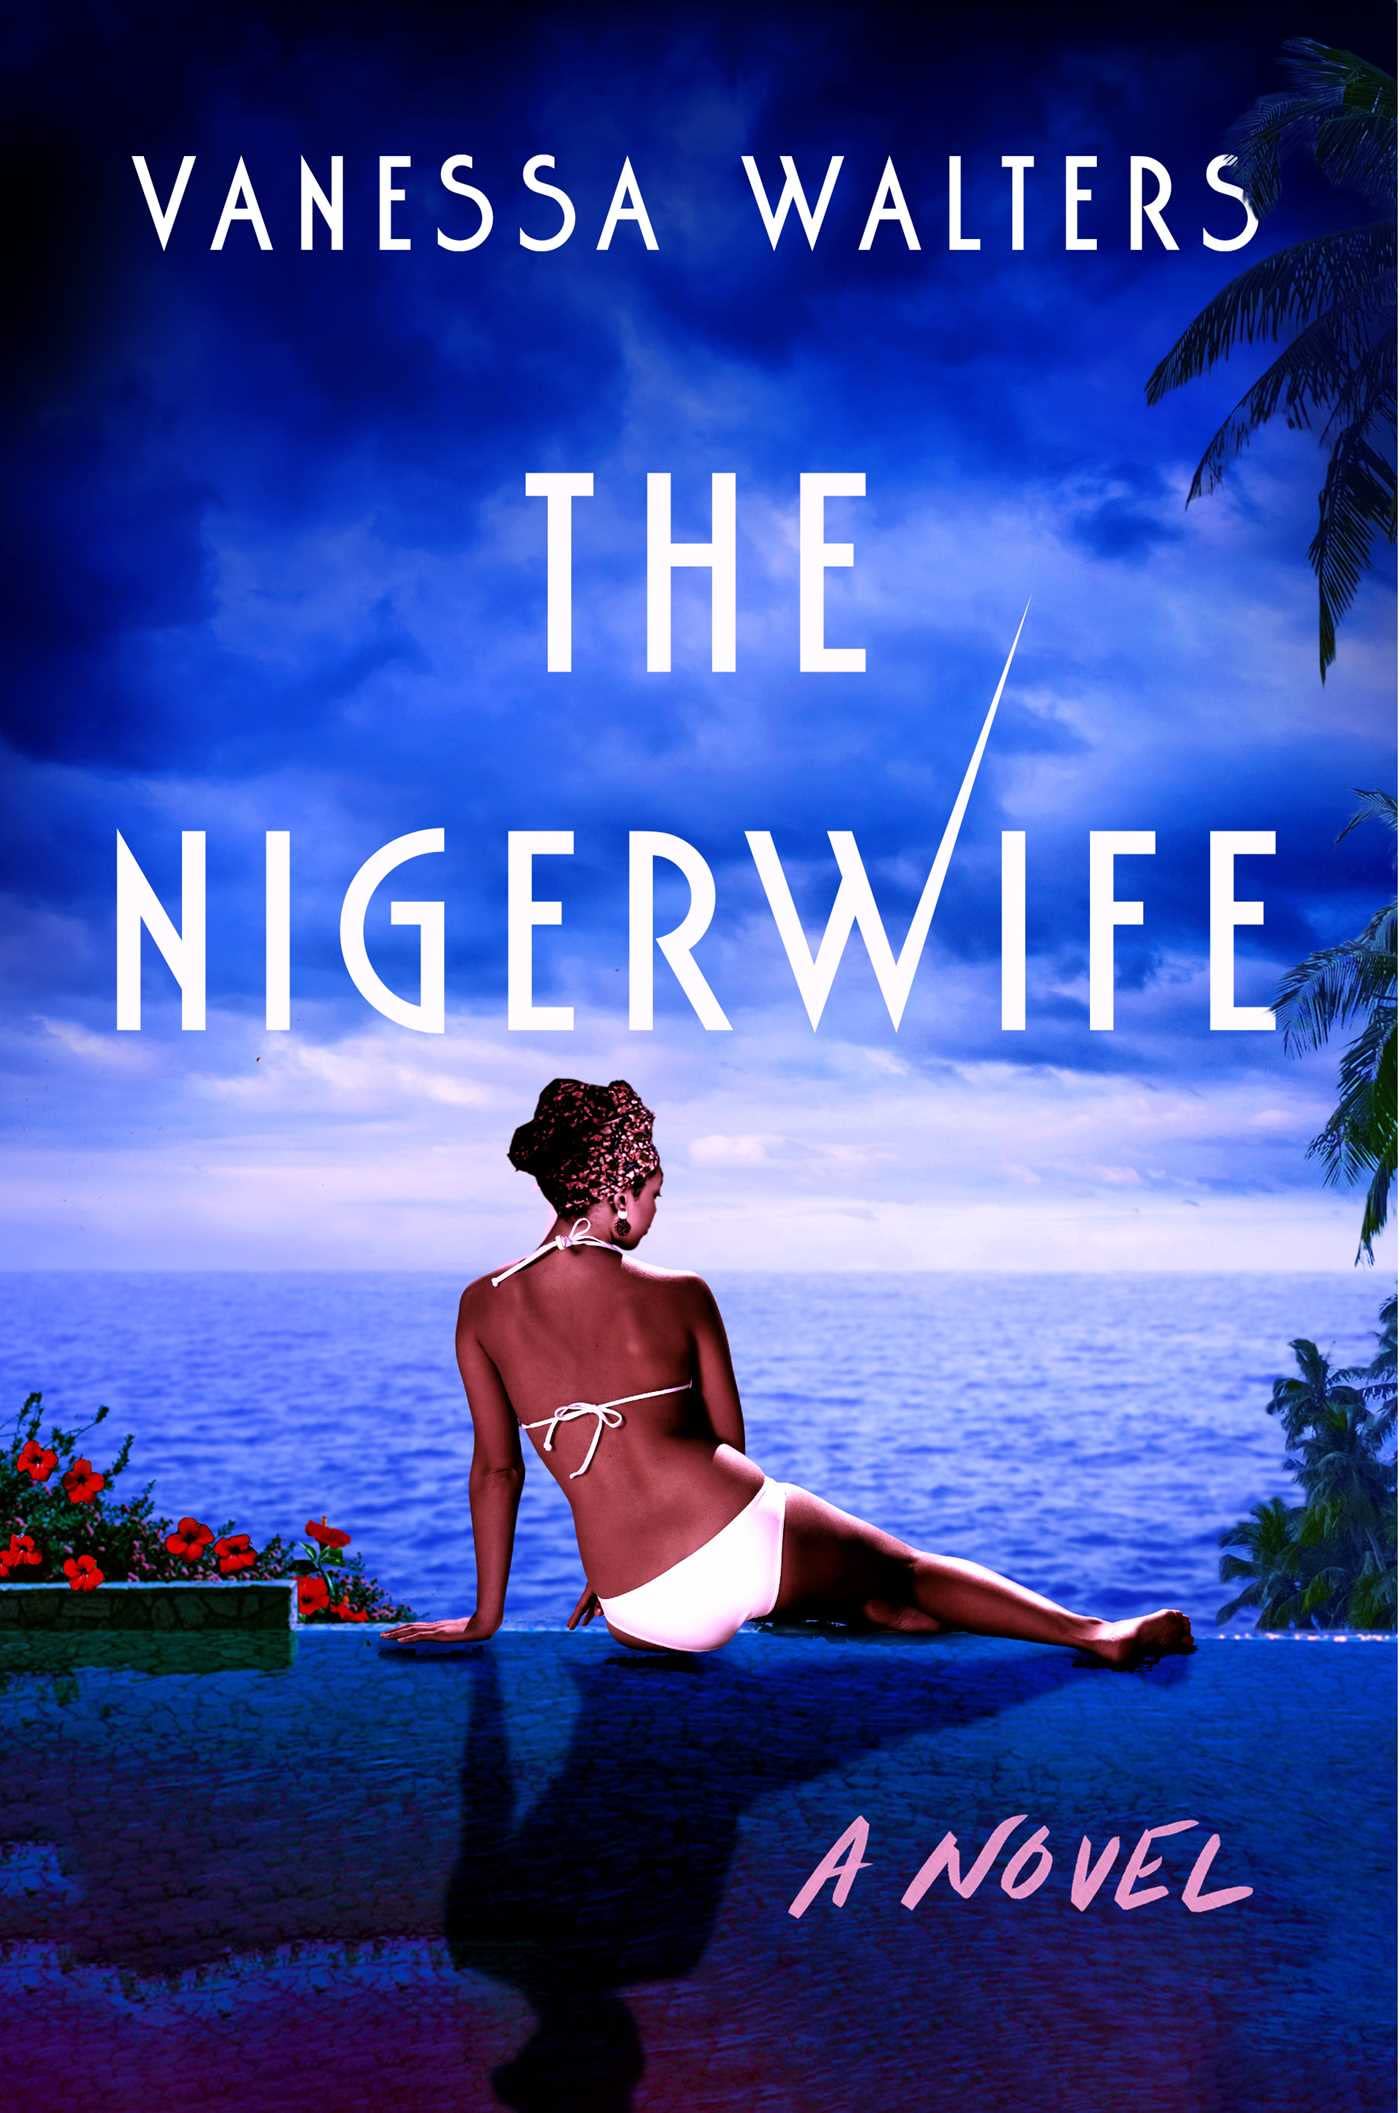 Image for "The Nigerwife"